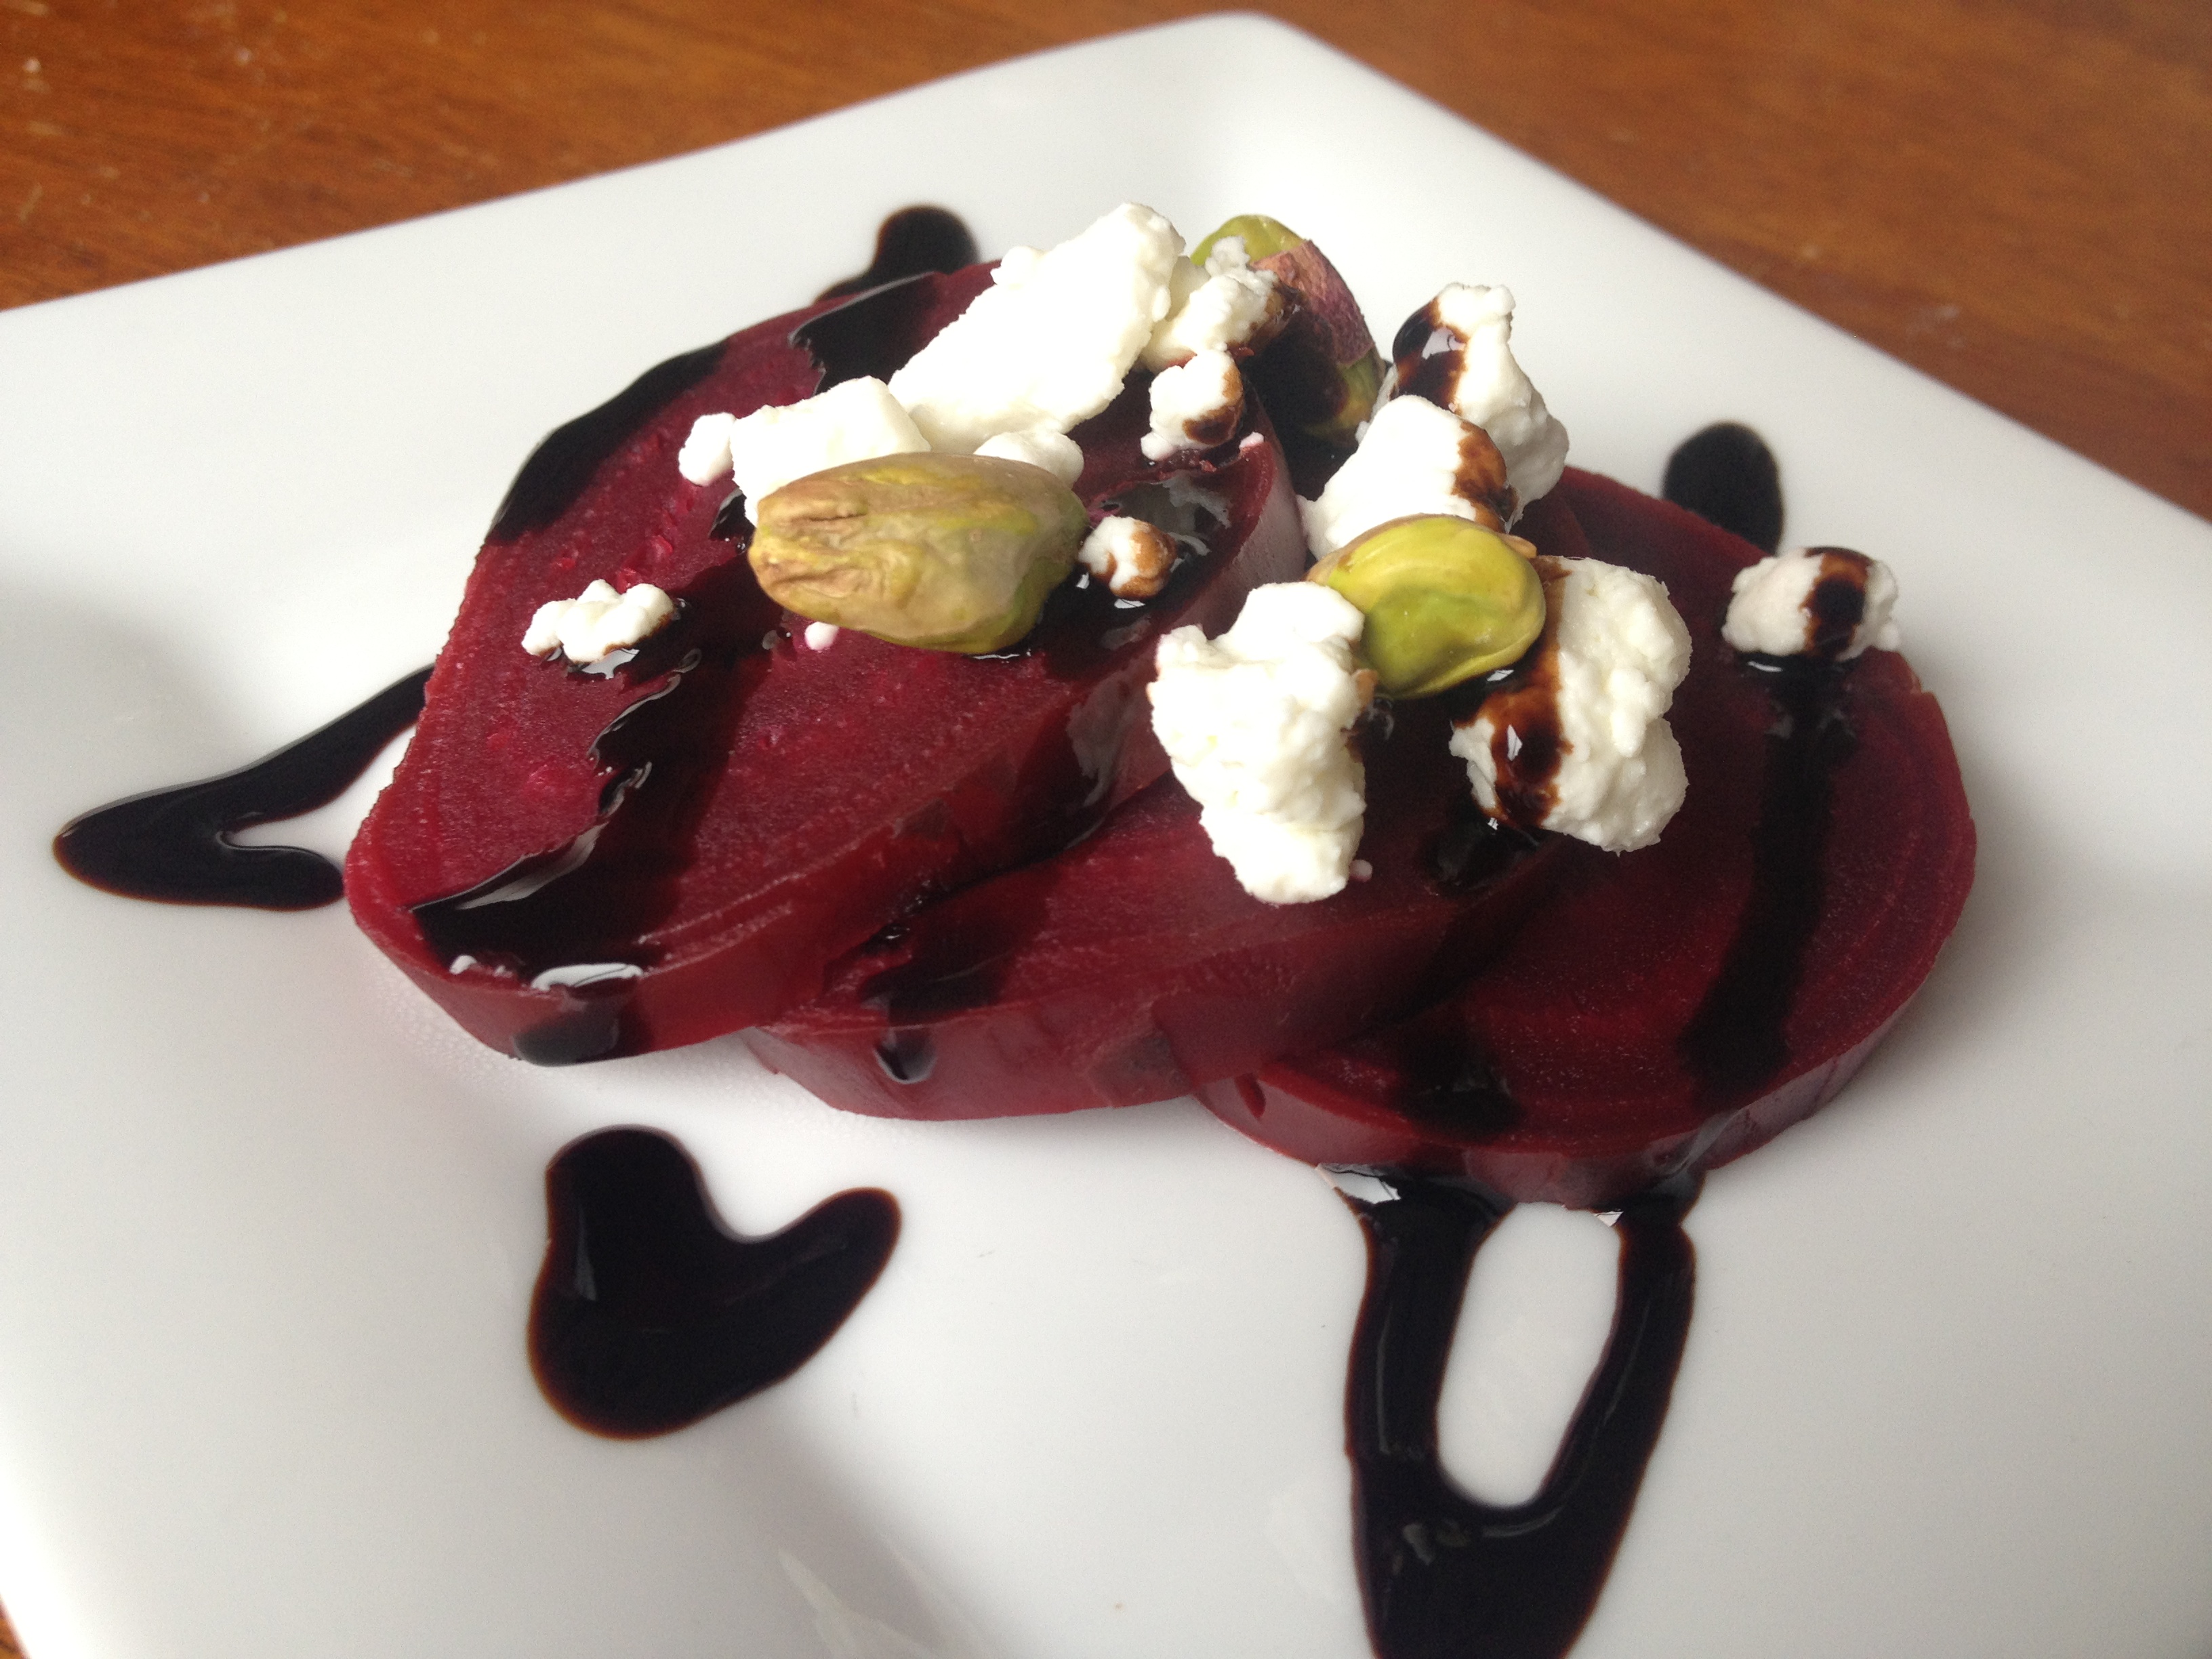 Balsamic Glazed Beets With Goat Cheese and Pistachios